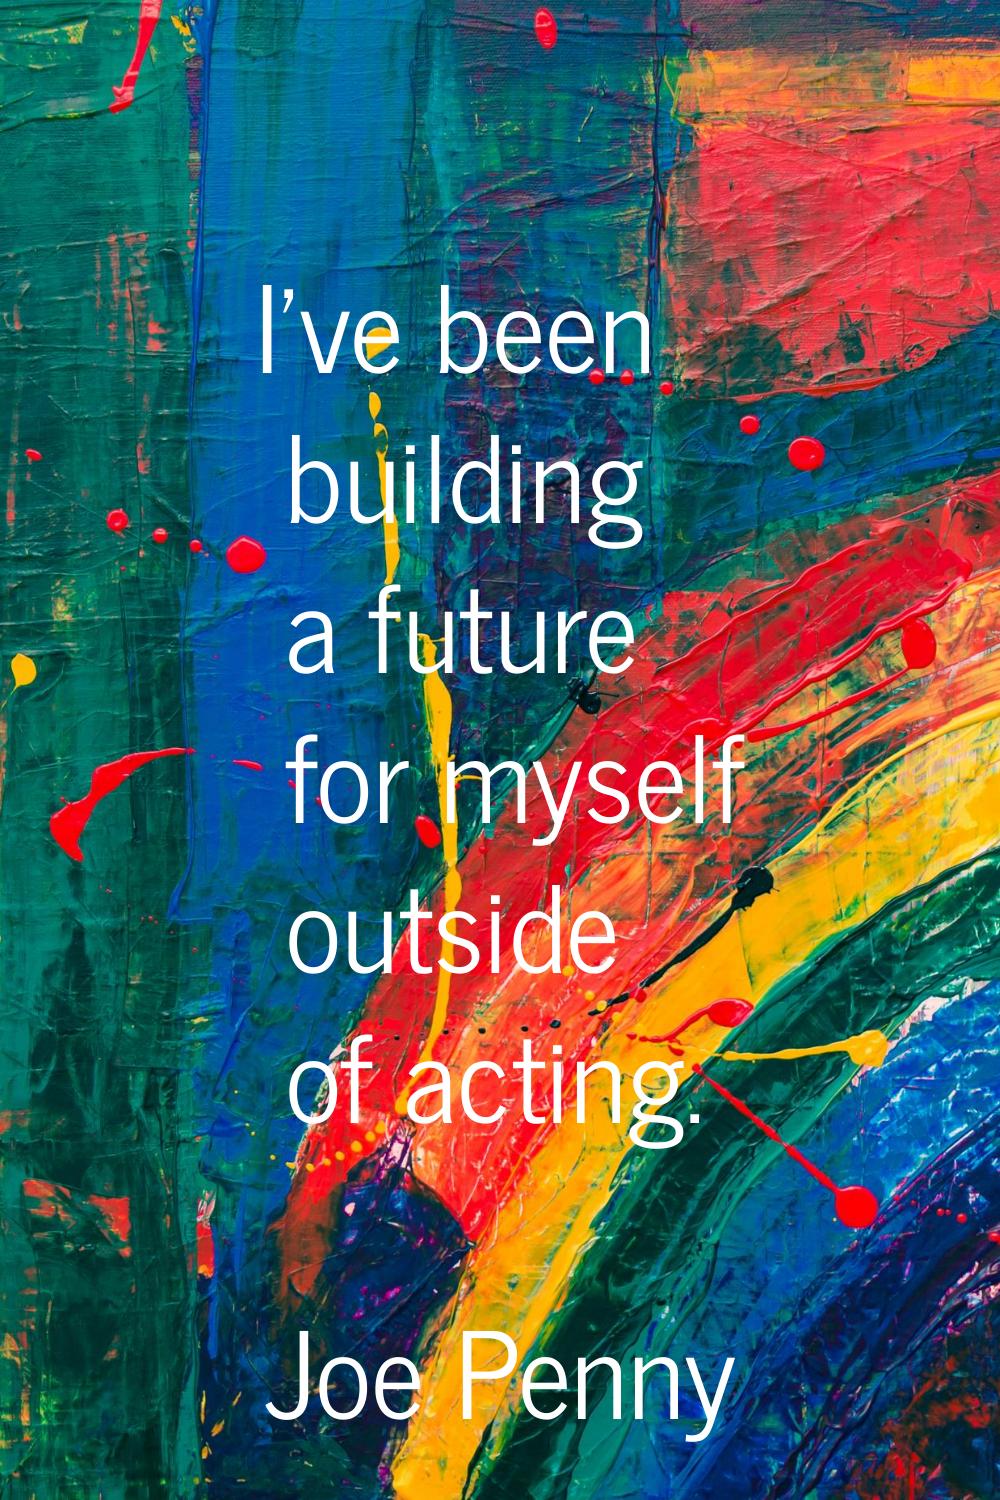 I've been building a future for myself outside of acting.